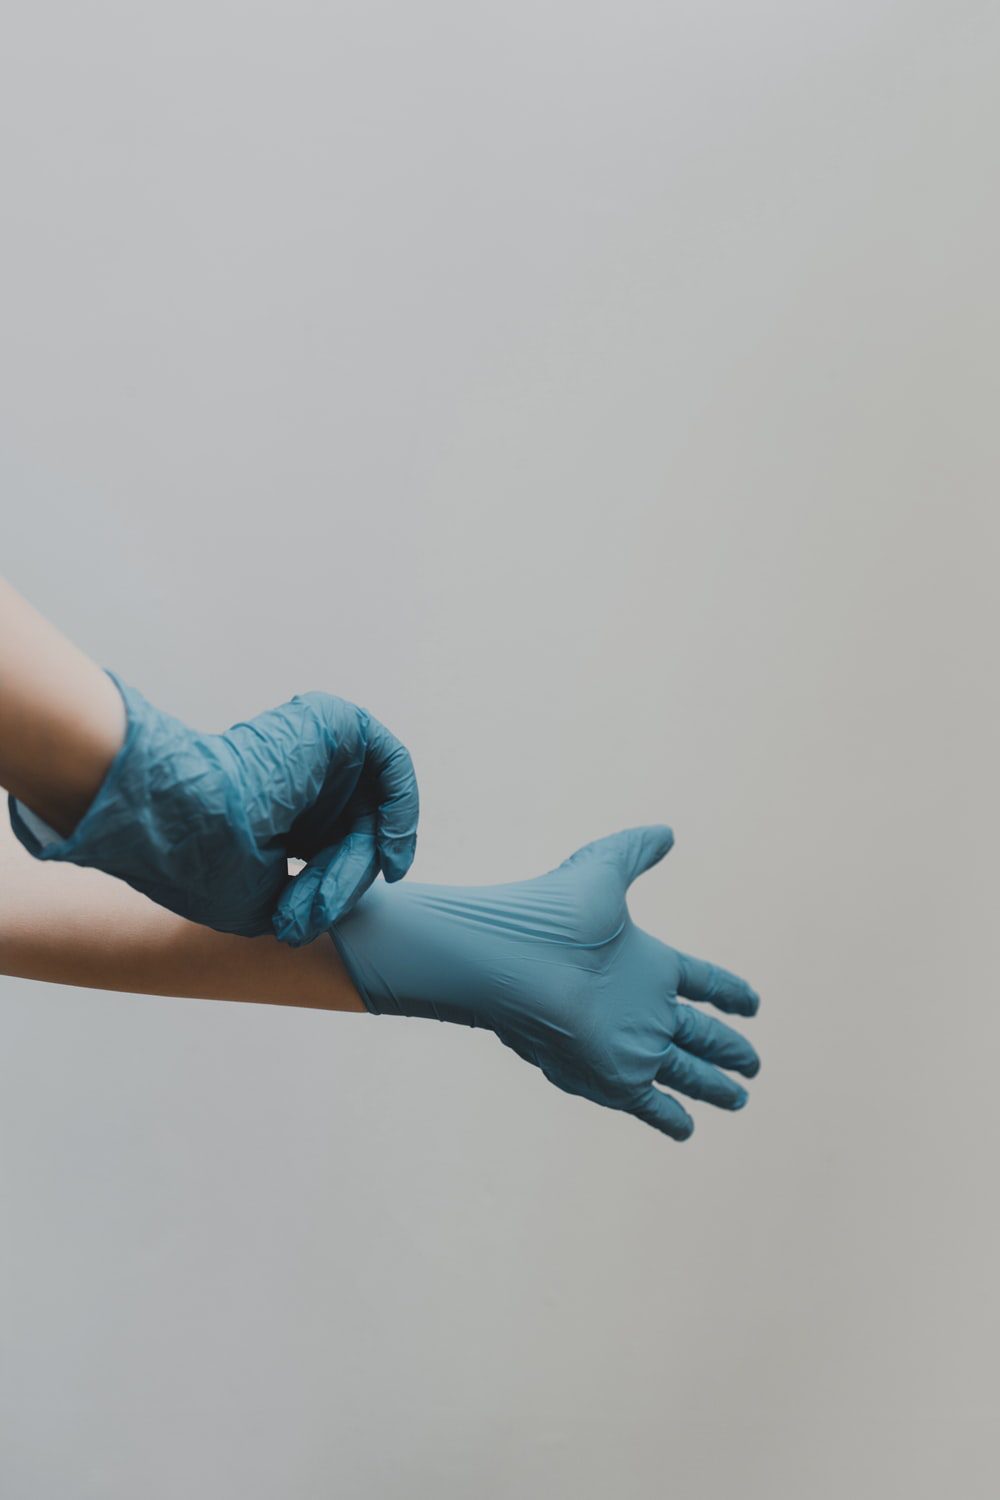 Why Disposable Gloves Play an Essential Role in Our Reopened Economy